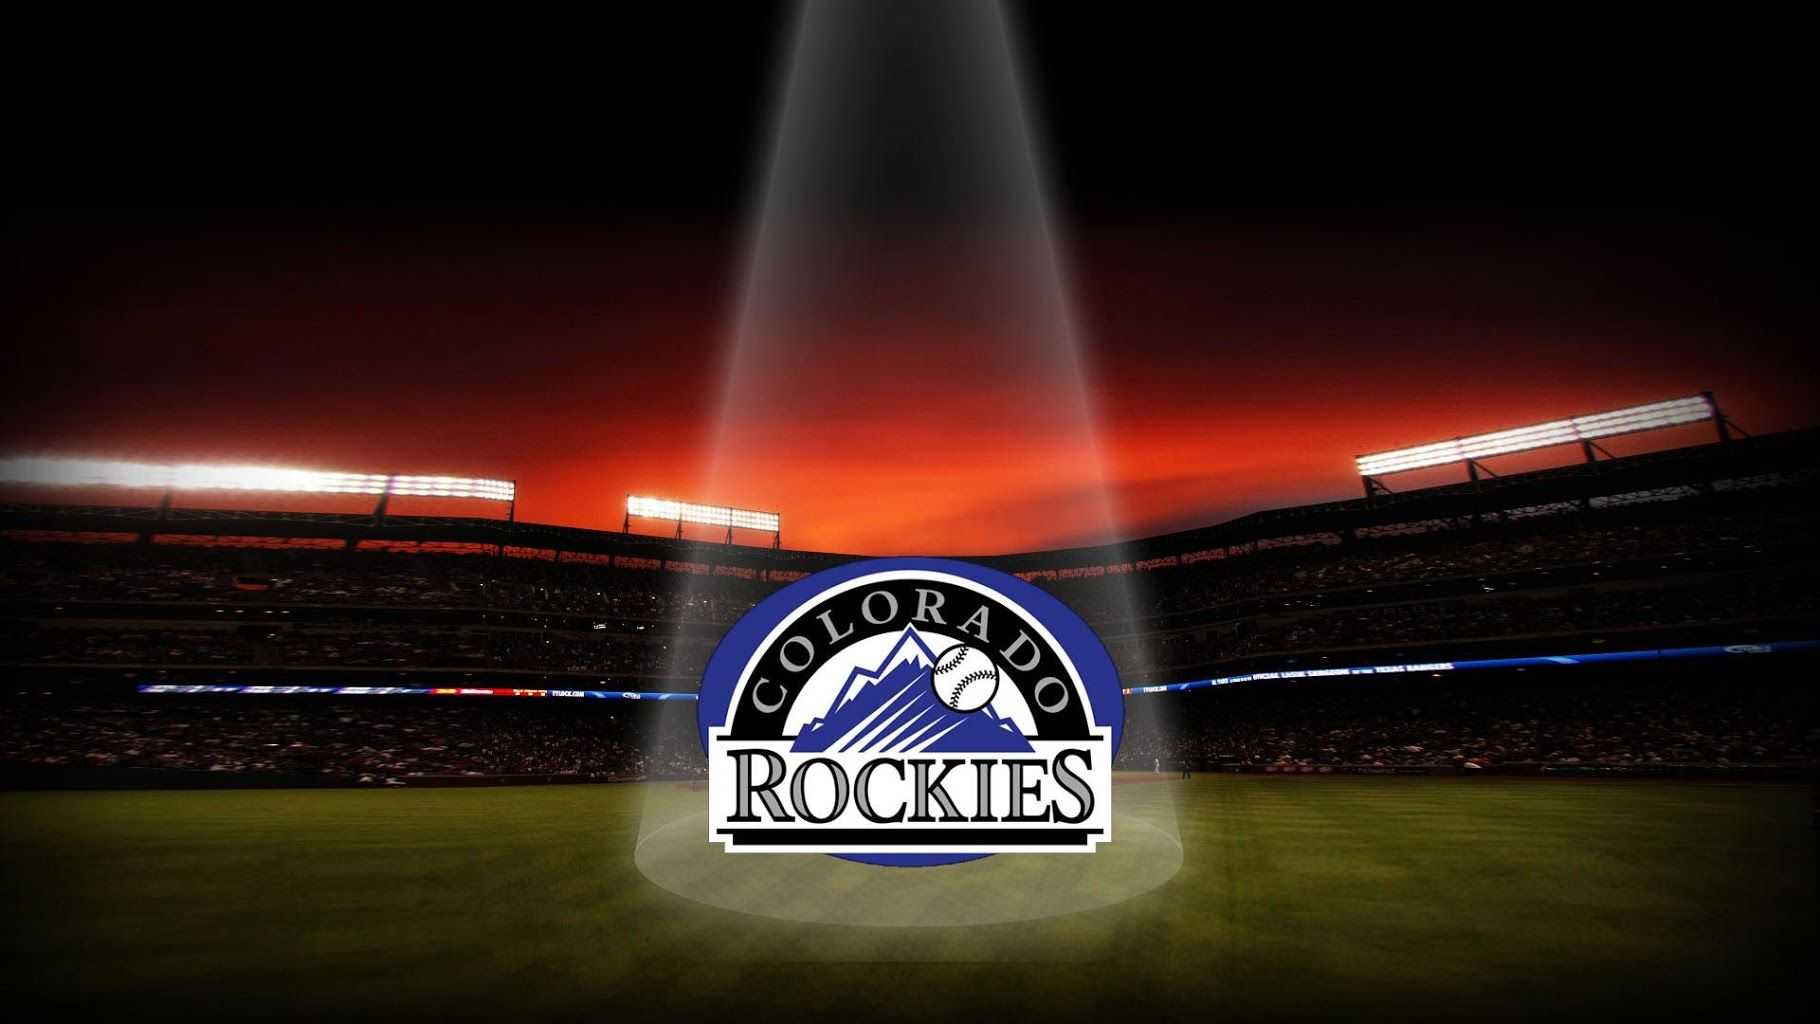 Colorado Rockies Wallpaper Full HD High Quality For Androids Image